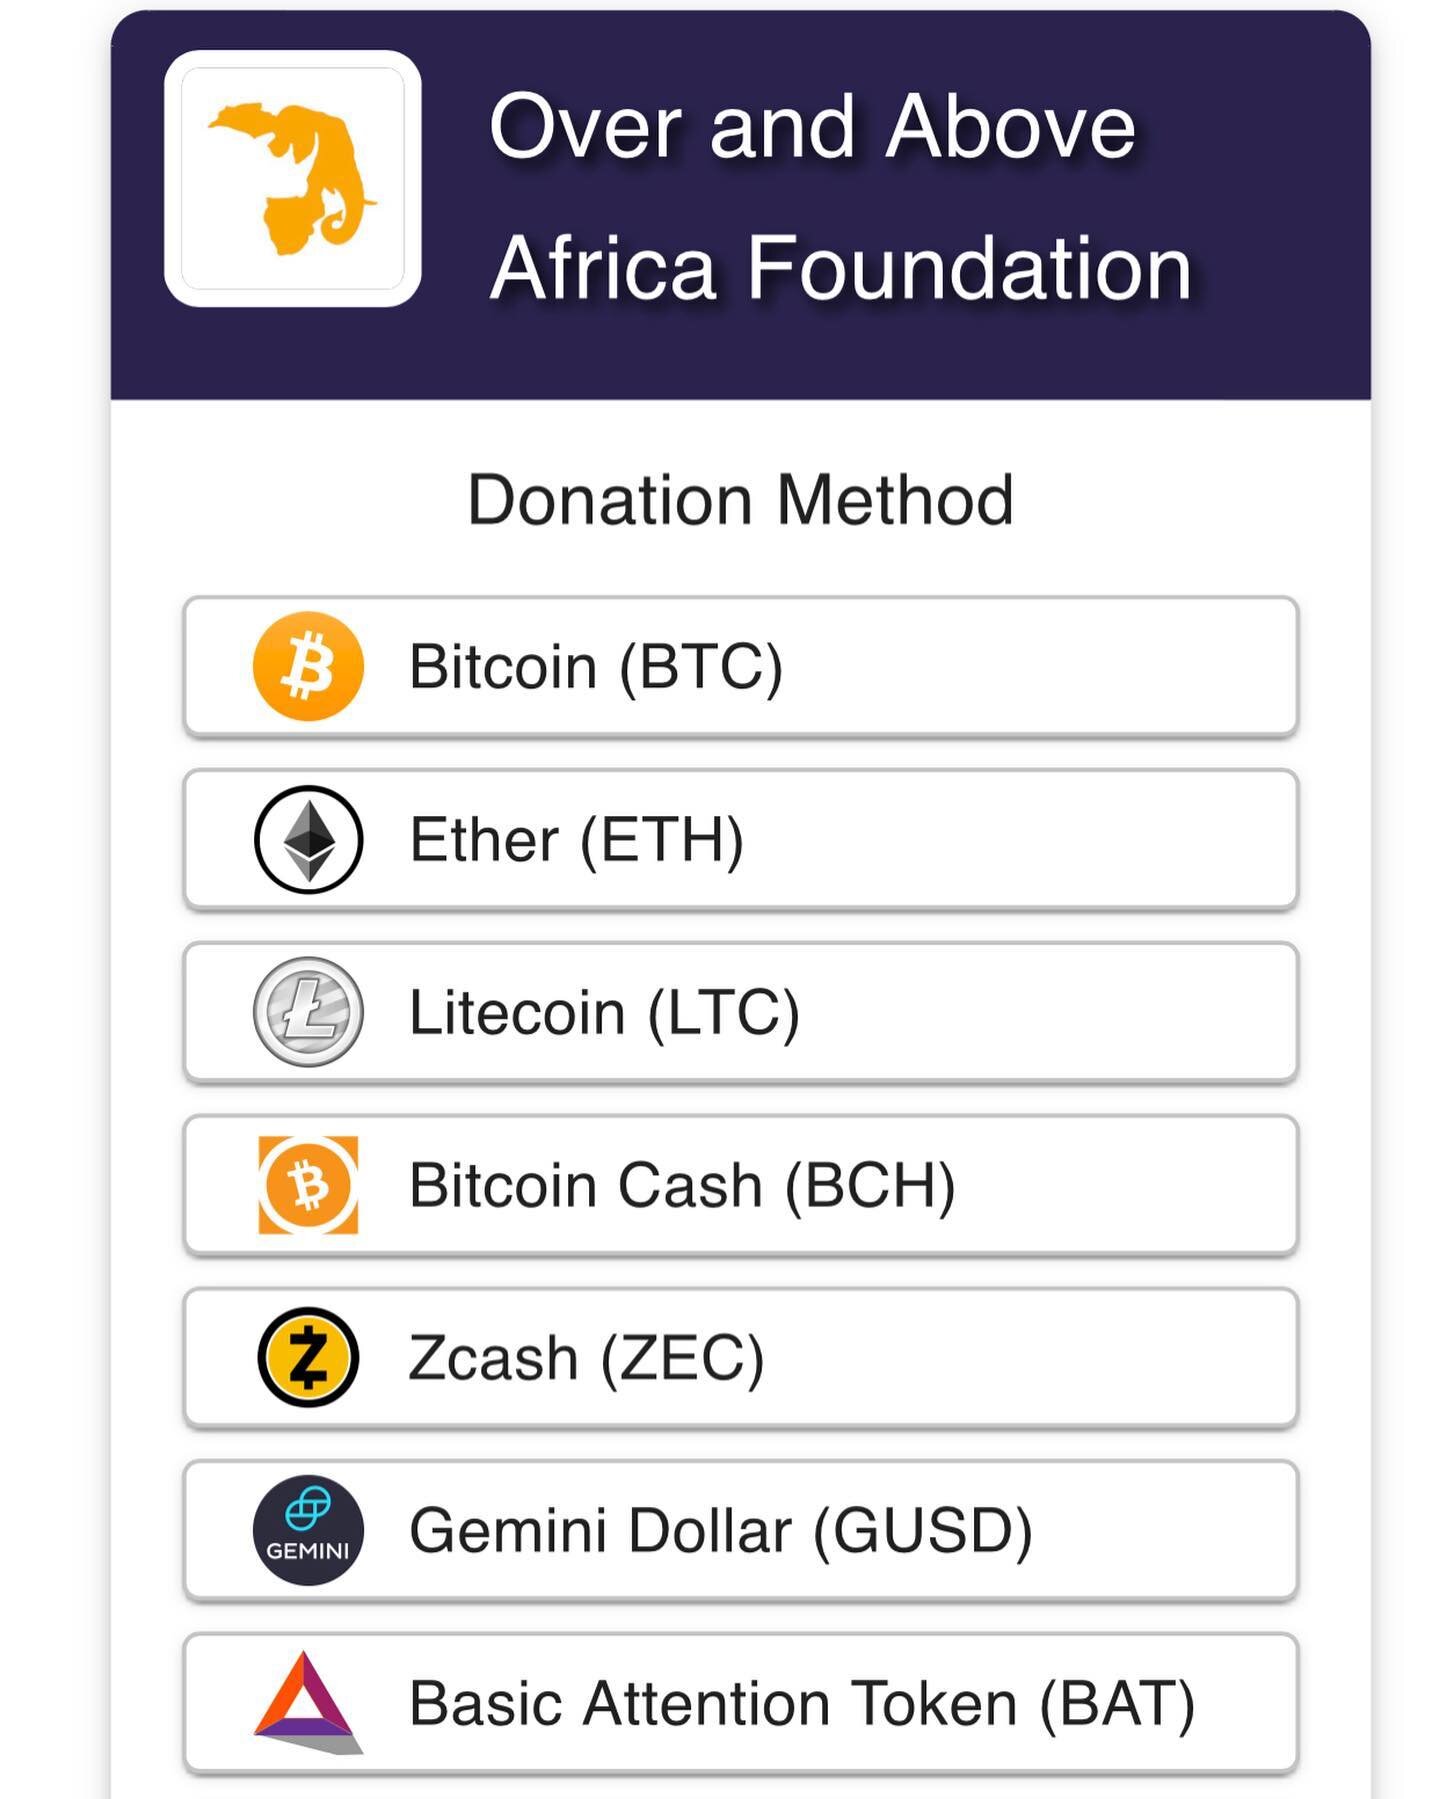 We are now welcoming #cryptocurrency!  Make your tax deductible donation to us at OverAndAboveAfrica.com/donate - and choose your #crypto of choice from #ethereum to #bitcoin #zcash #litecoin #gemeni - protect vulnerable wildlife from becoming extinc